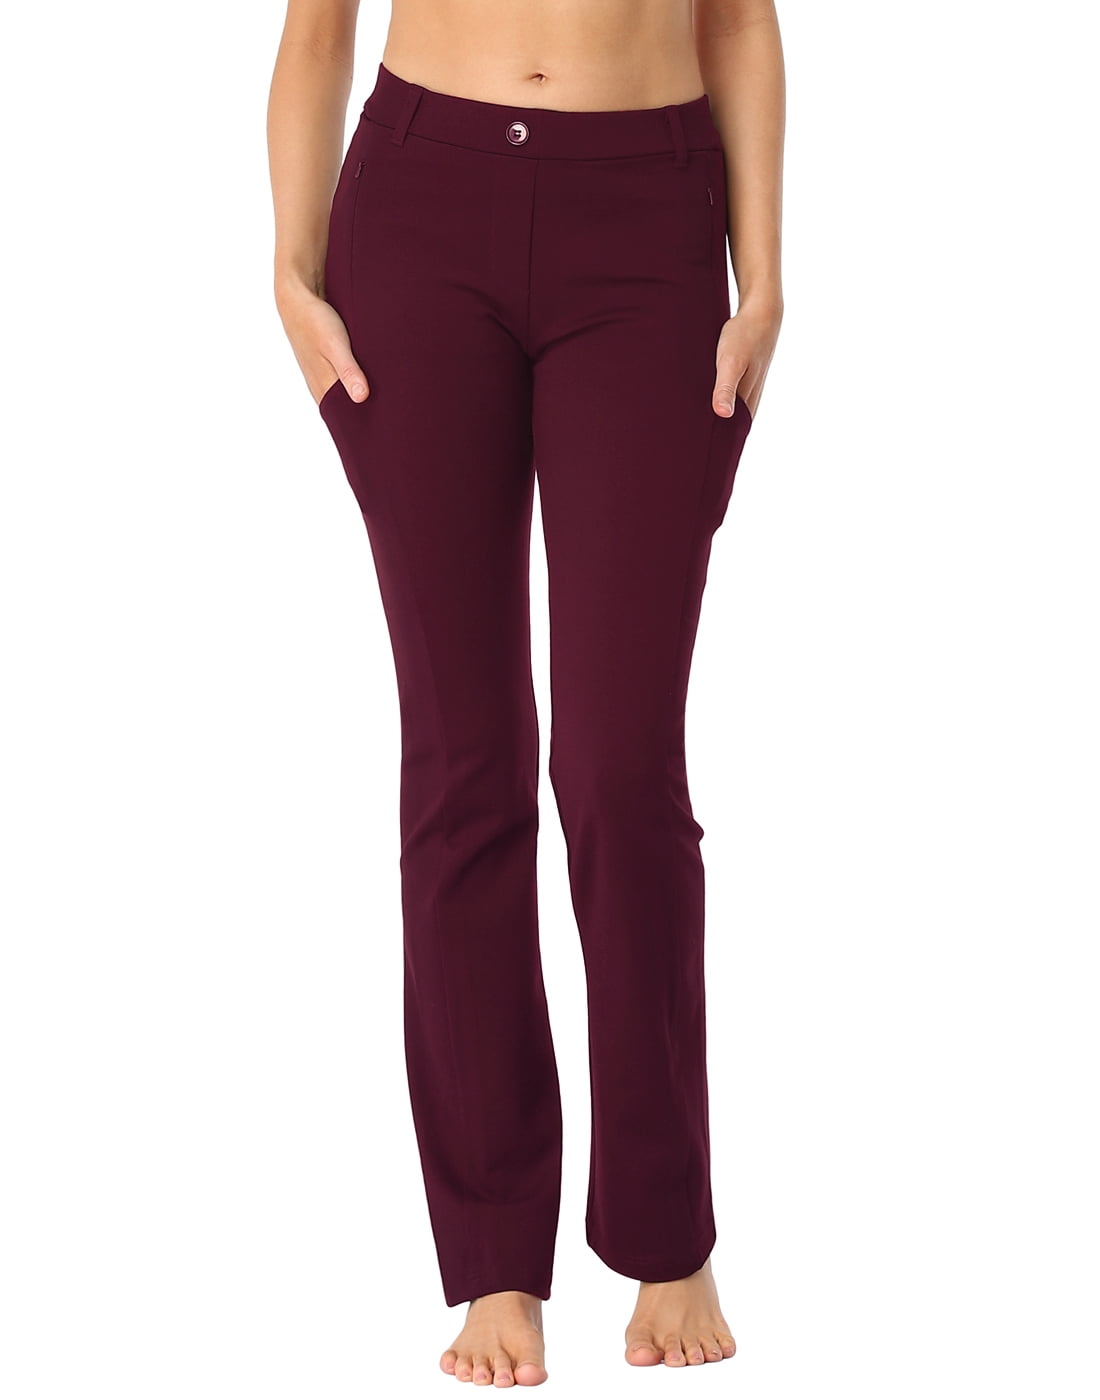  AFITNE Women's Yoga Dress Pants Skinny Pull On Work Pants Slim  Fit Leg Stretch Business Casual Office Slacks with Pockets 26 Burgundy, XS  : Clothing, Shoes & Jewelry